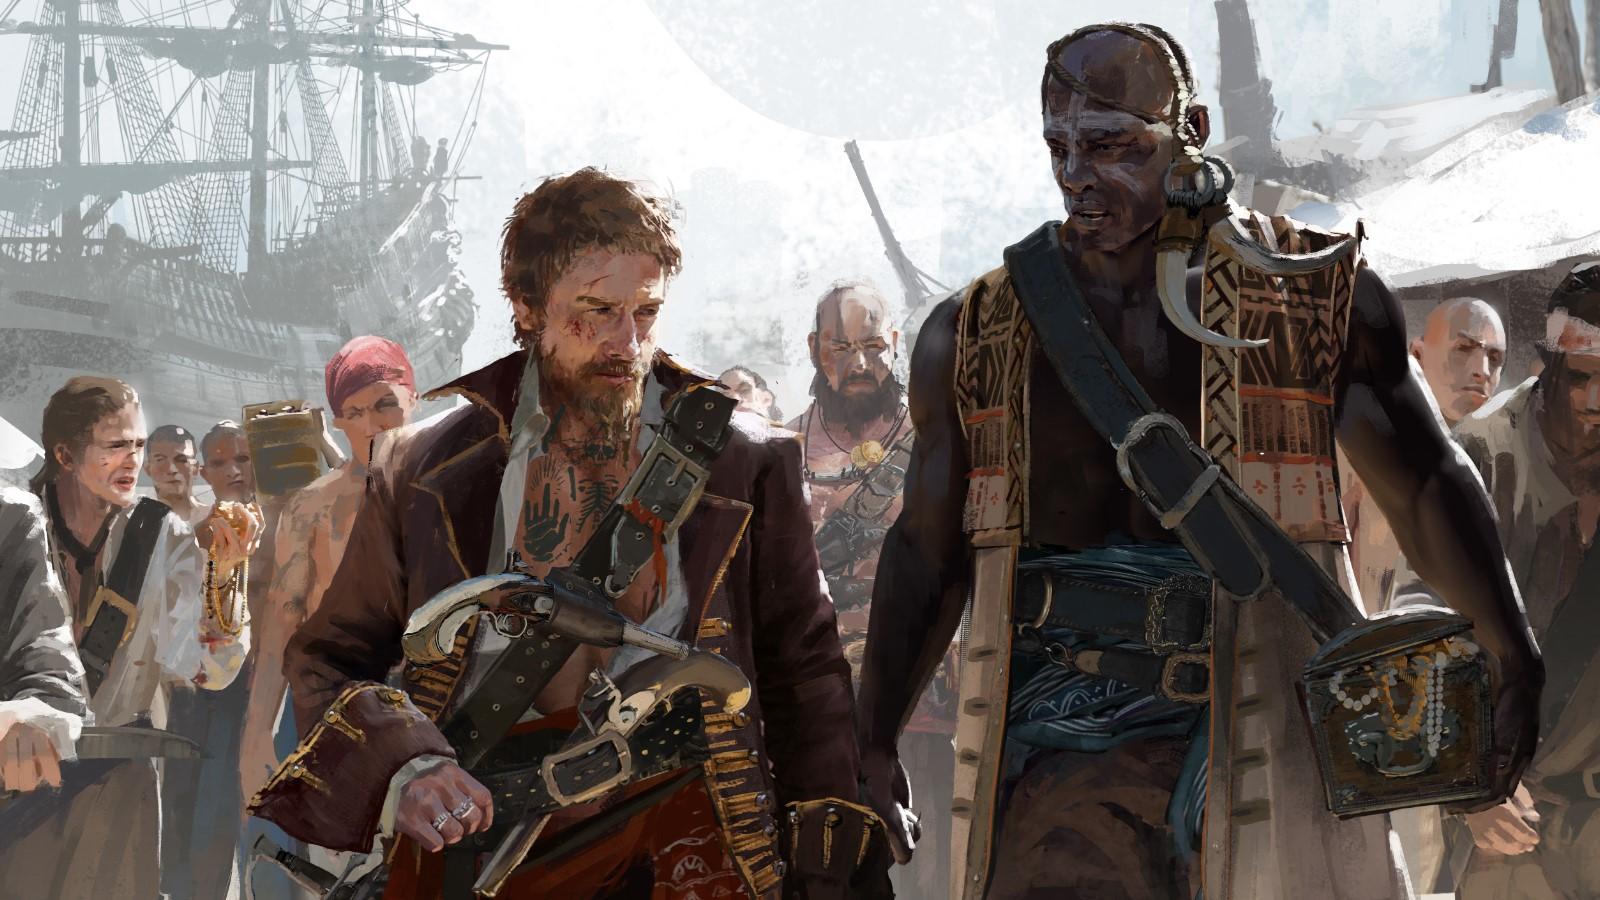 Two pirates followed by their crew in Skull and Bones